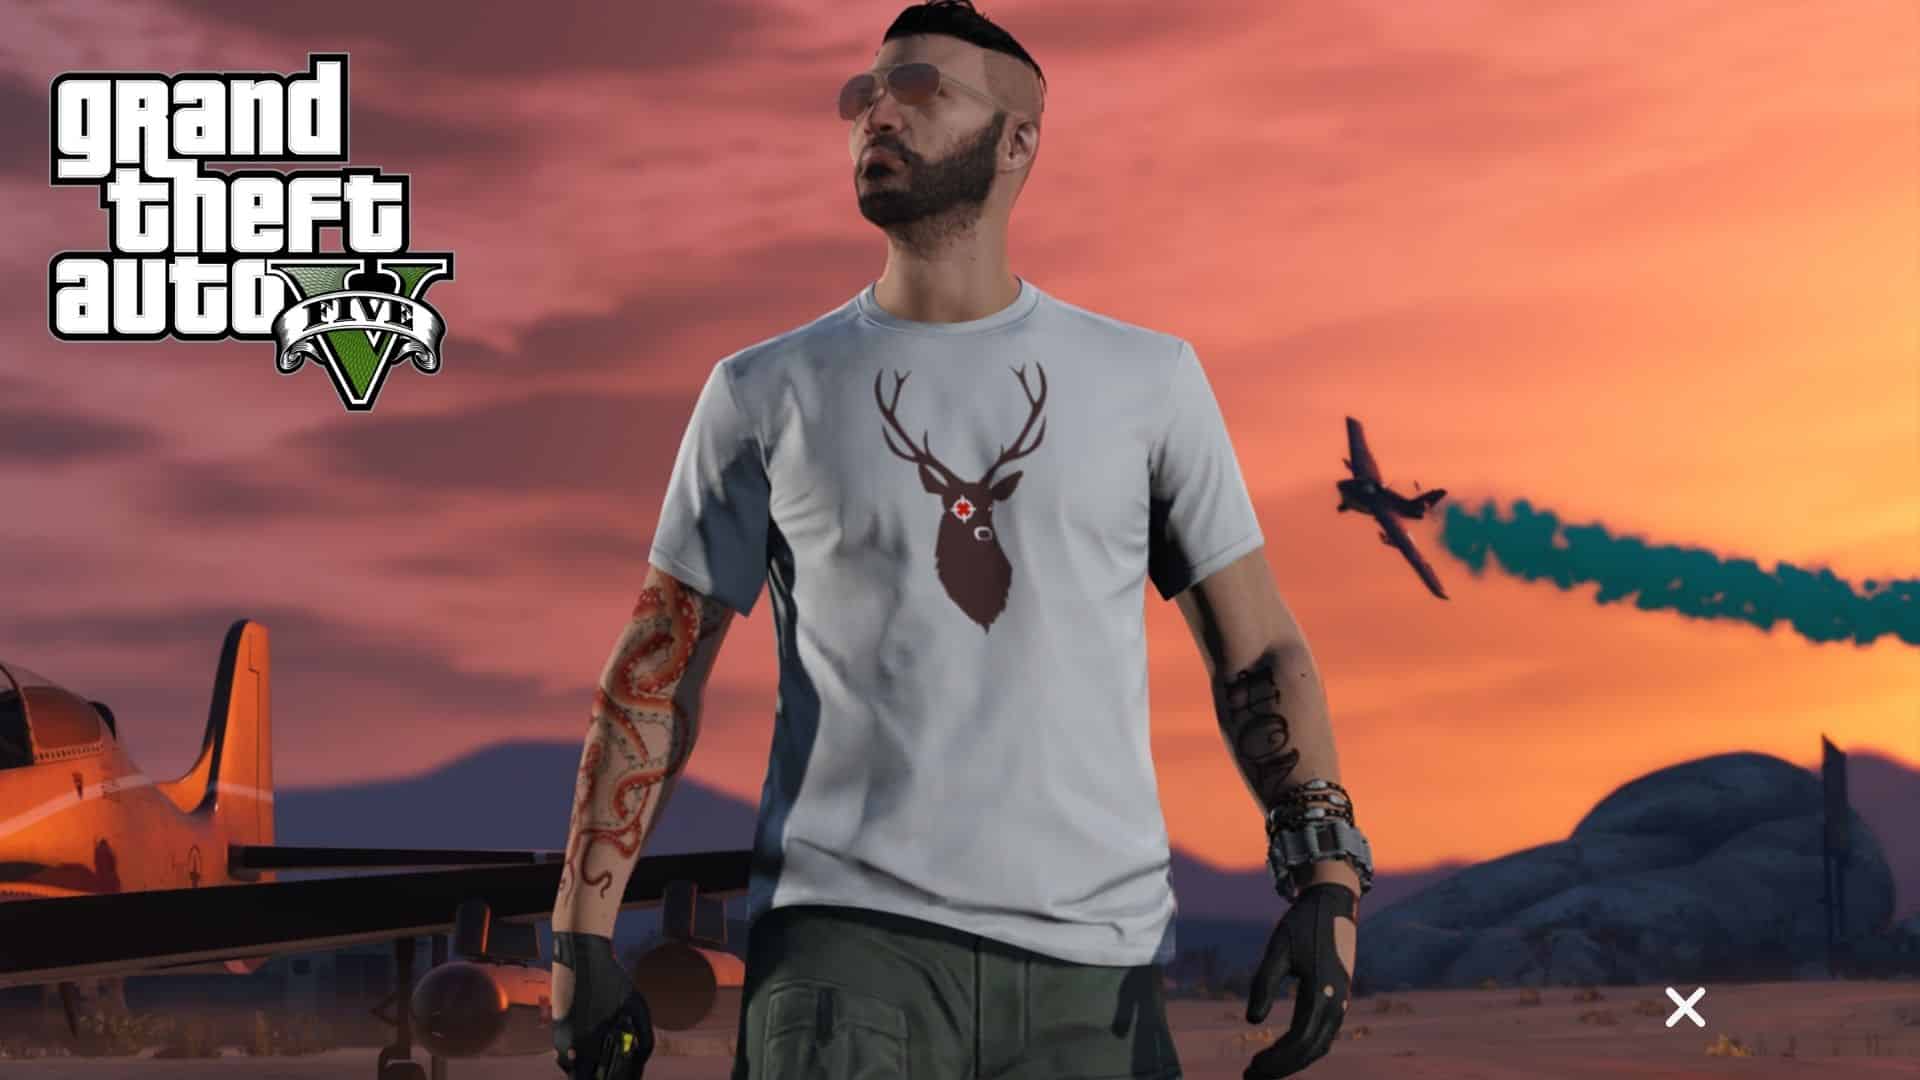 GTA 5 character with planes